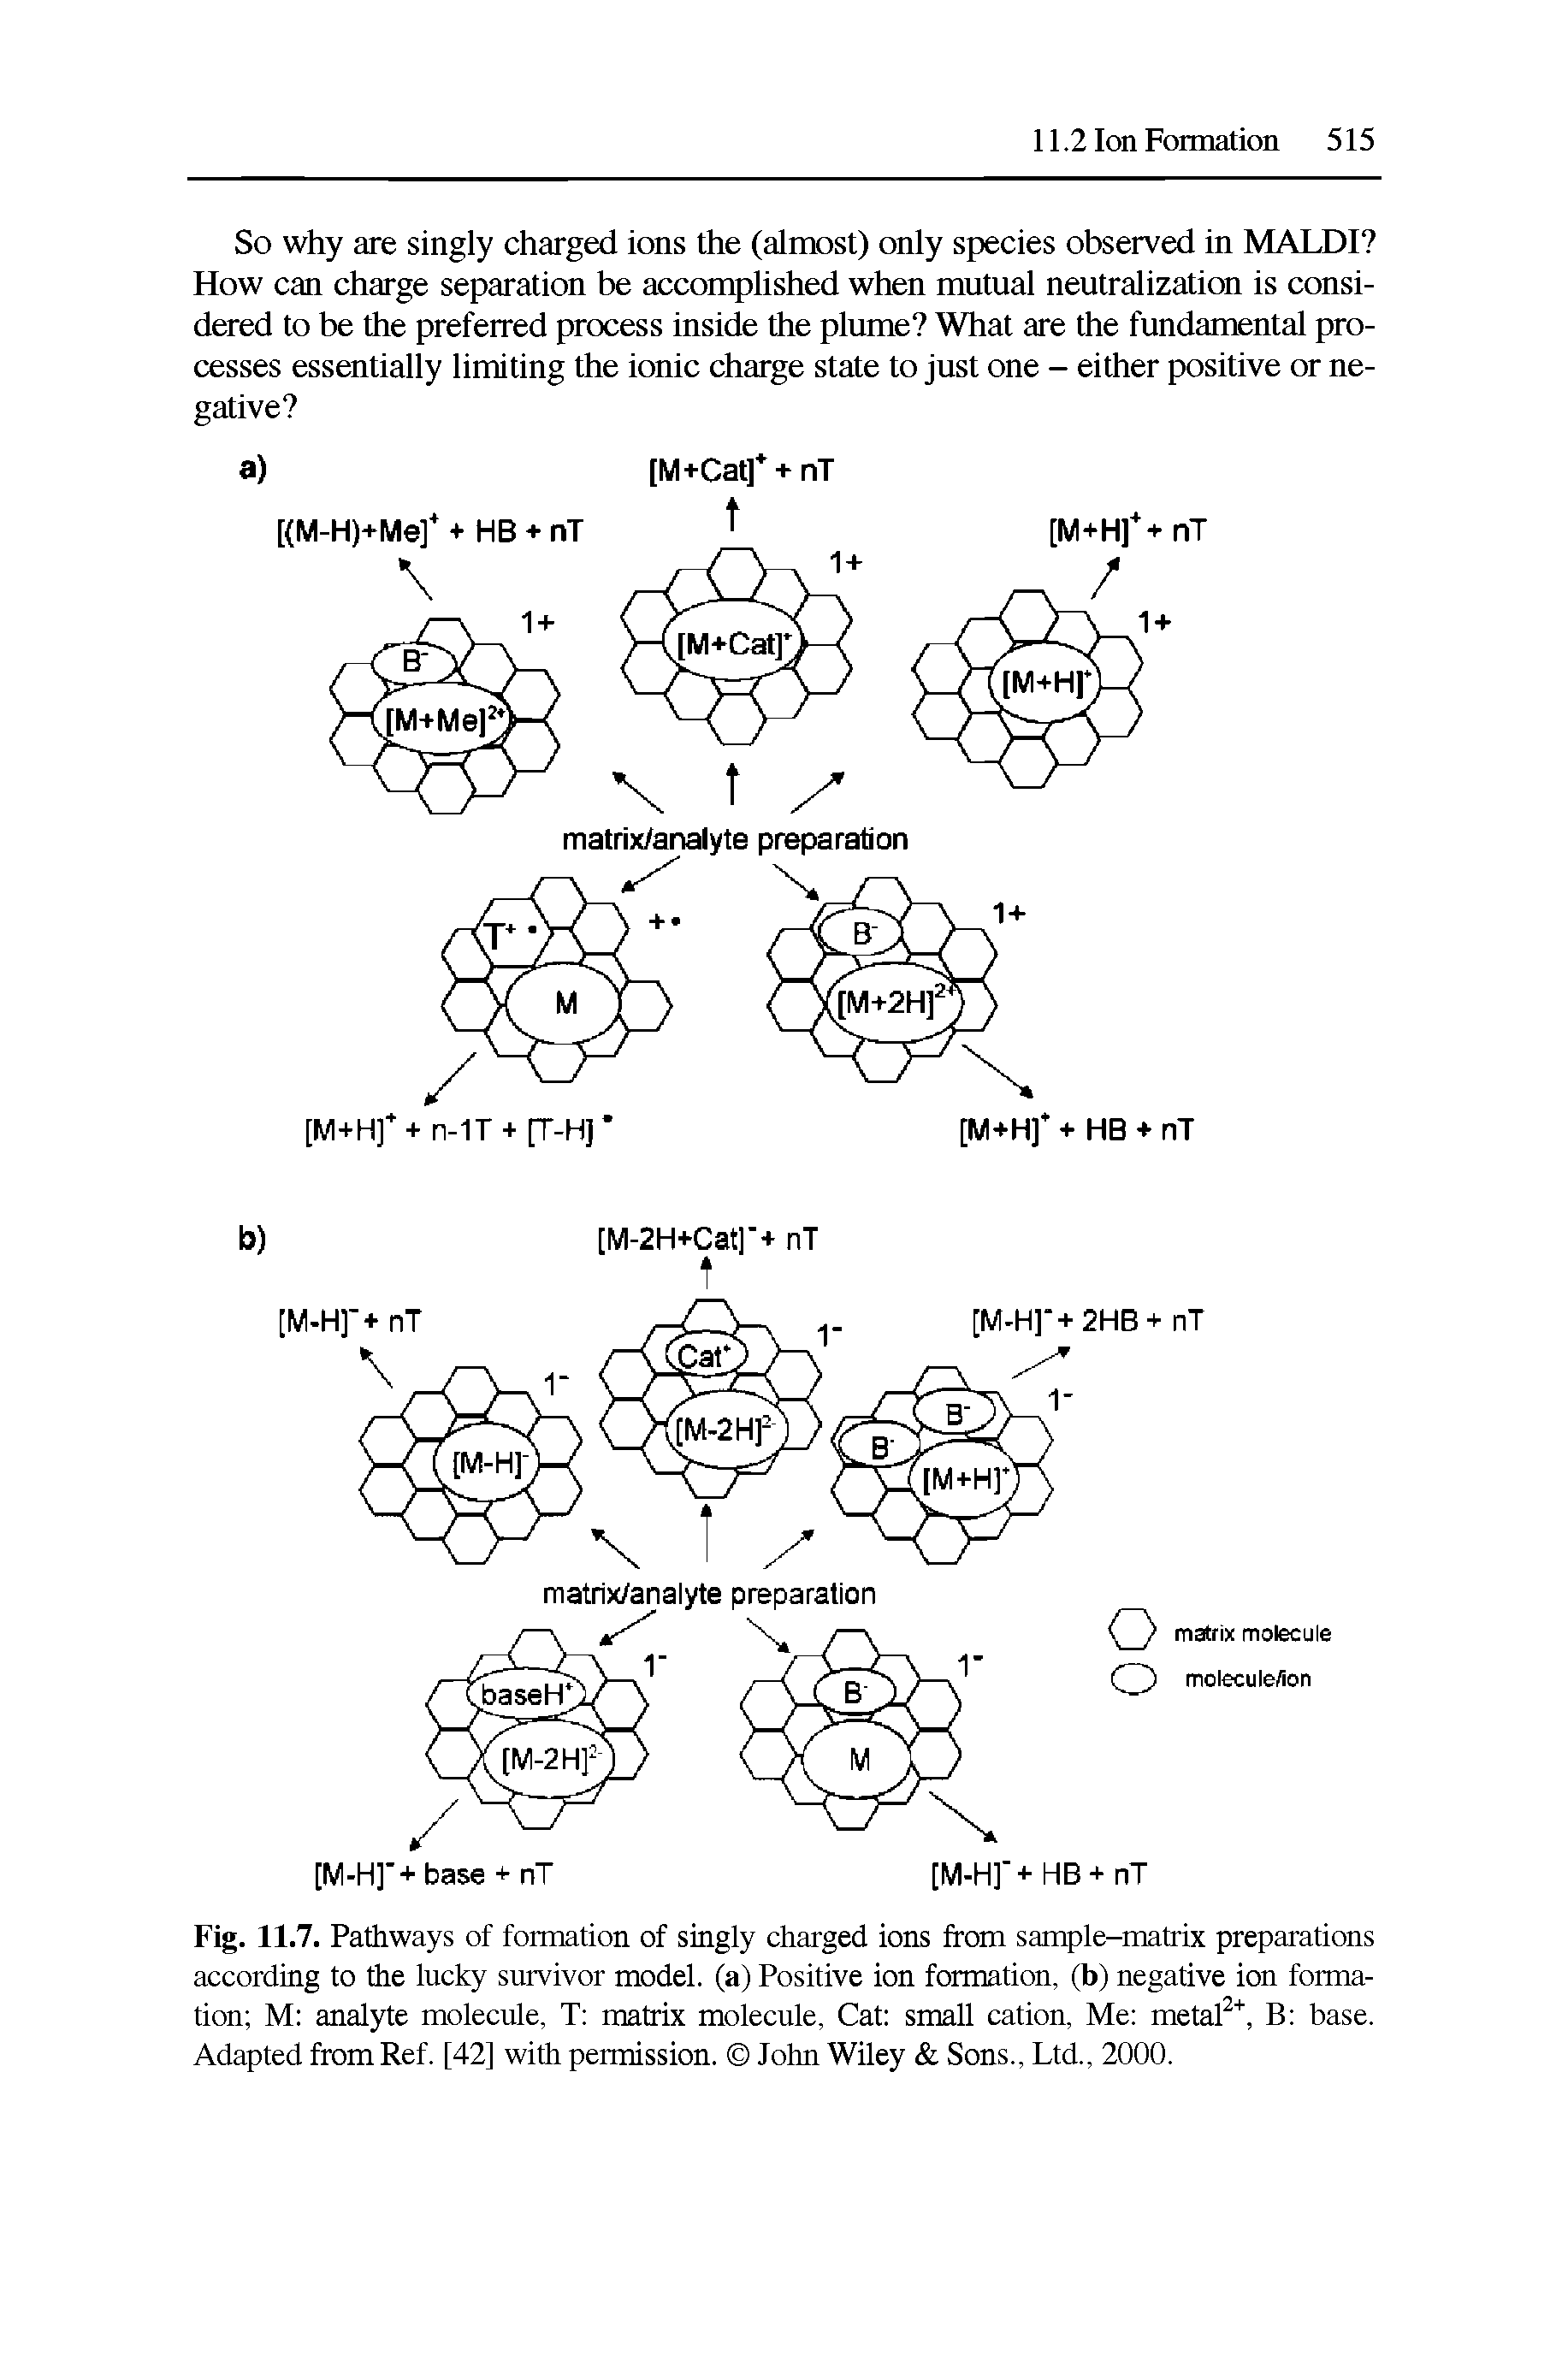 Fig. 11.7. Pathways of formation of singly charged ions from sample-matrix preparations according to the lucky survivor model, (a) Positive ion formation, (b) negative ion formation M analyte molecule, T matrix molecule. Cat small cation. Me metal, B base. Adapted from Ref. [42] with permission. John Wiley Sons., Ltd., 2000.